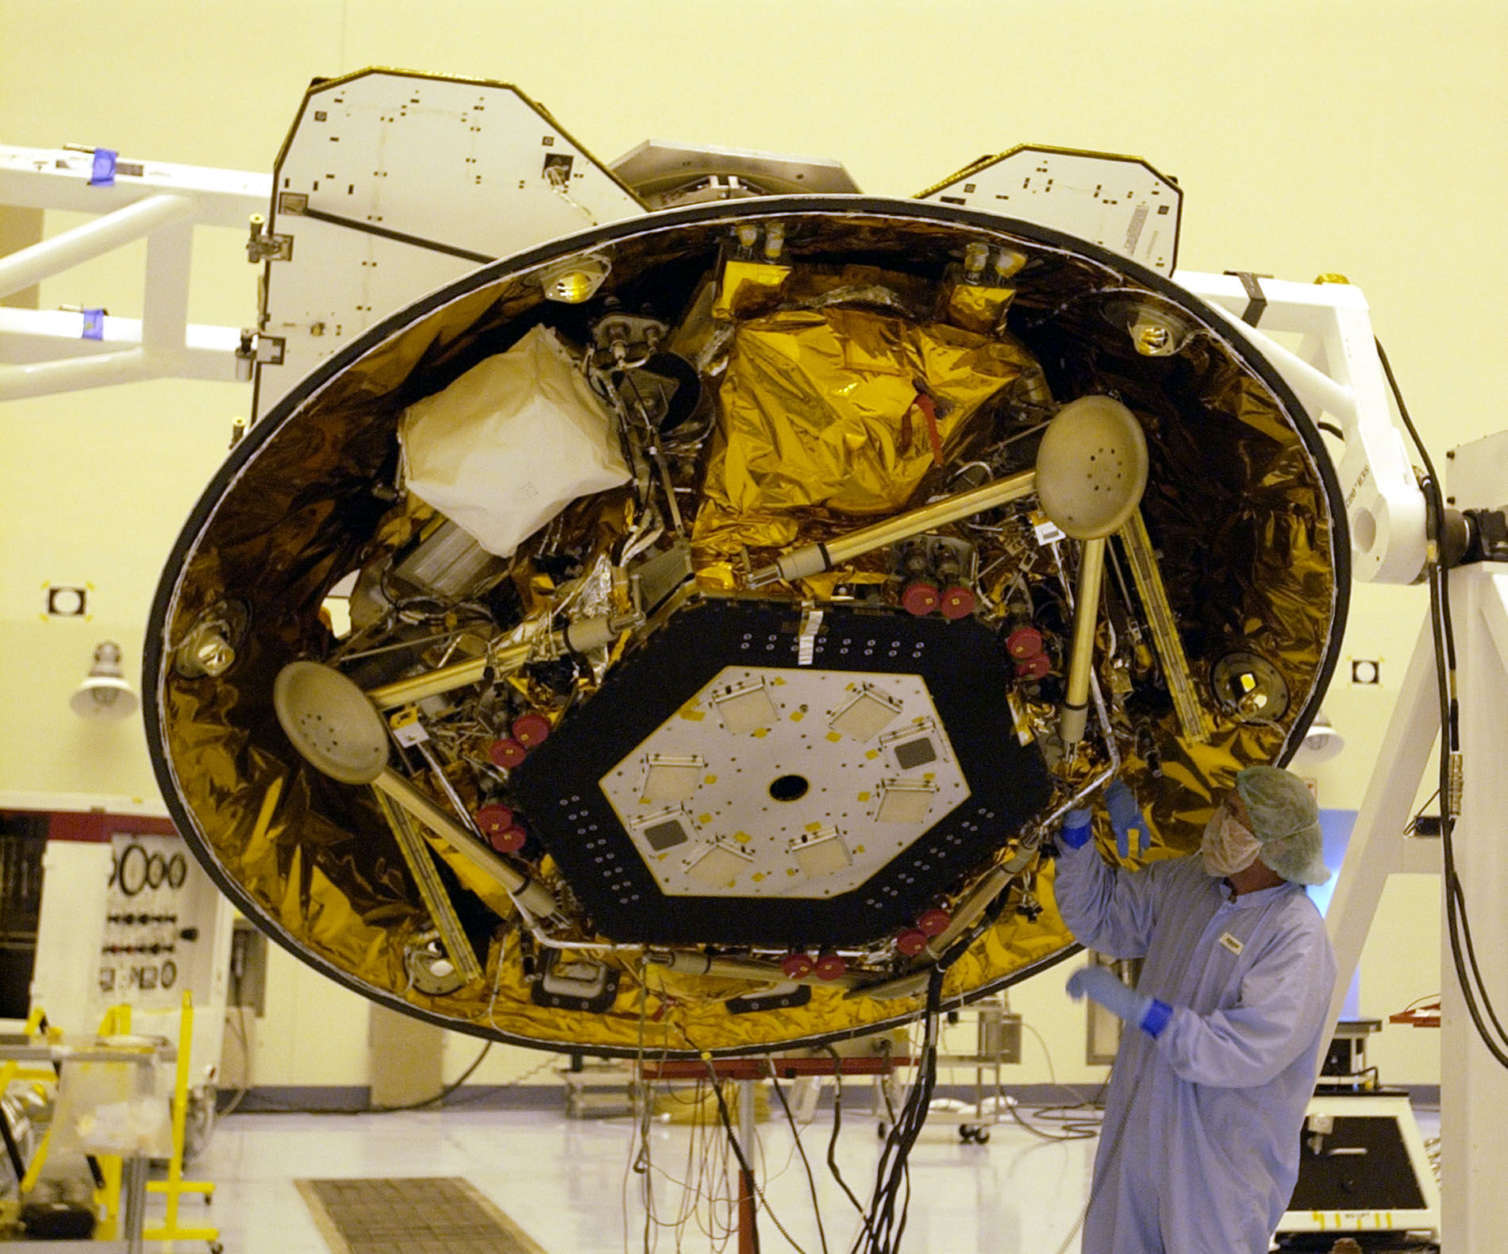 A technician makes checks on NASA's Phoenix Mars Lander in the Payload Hazardous Servicing Facility at the Kennedy Space Center in Cape Canaveral, Fla. Tuesday, June 26, 2007. The Phoenix spacecraft is scheduled for launch on a Delta II rocket Aug. 3. It will land in the arctic region of Mars. (AP Photo/Peter Cosgrove)